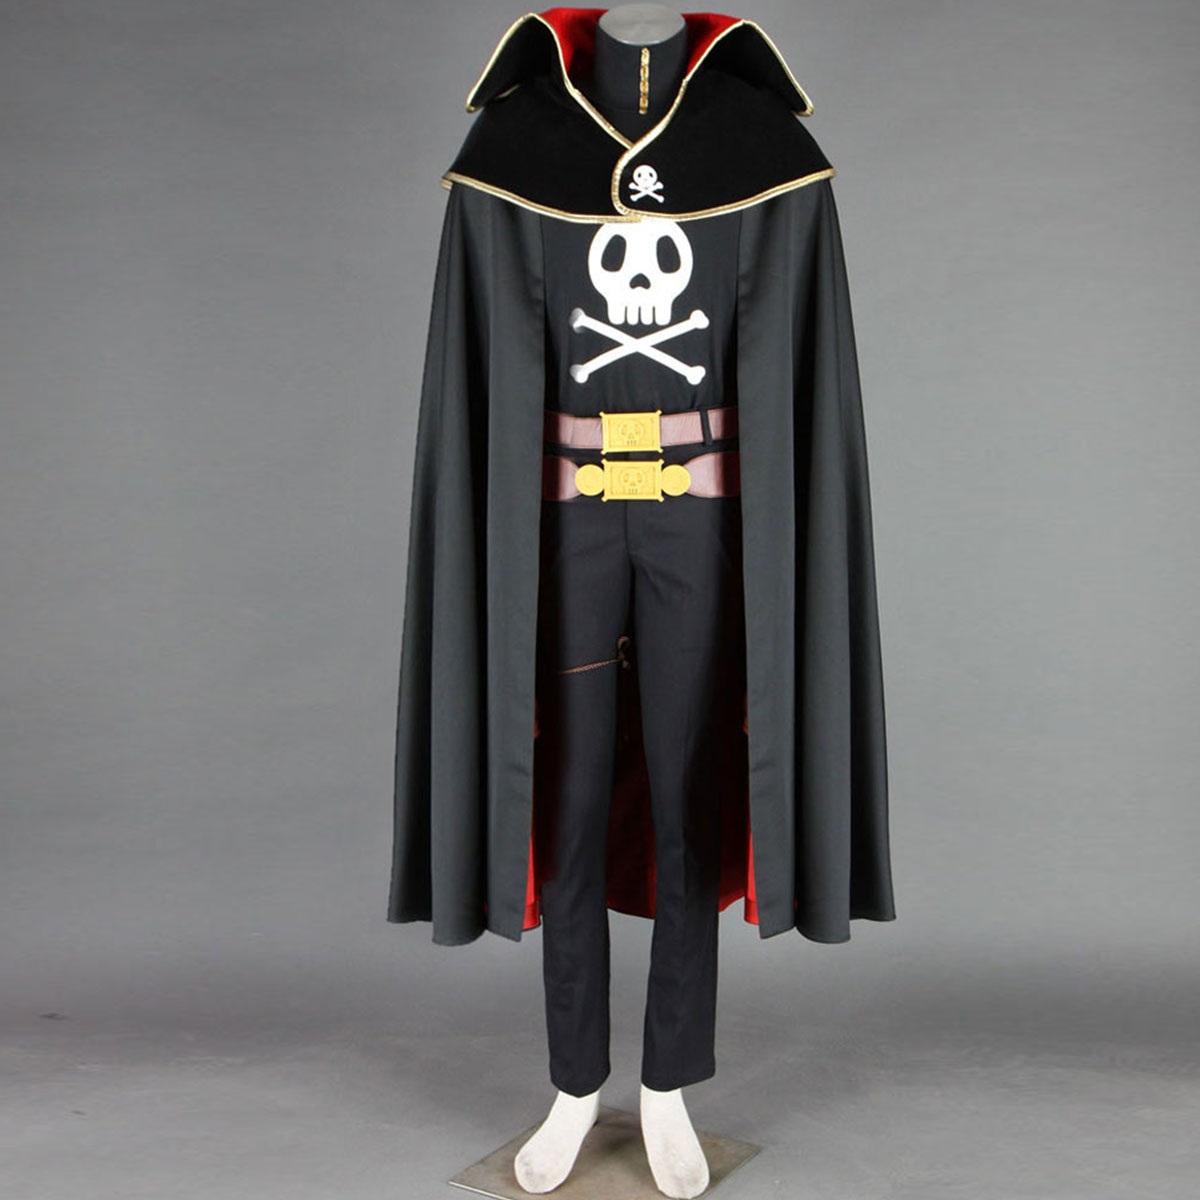 Galaxy Express 999 Captain Harlock Cosplay Costumes New Zealand Online Store